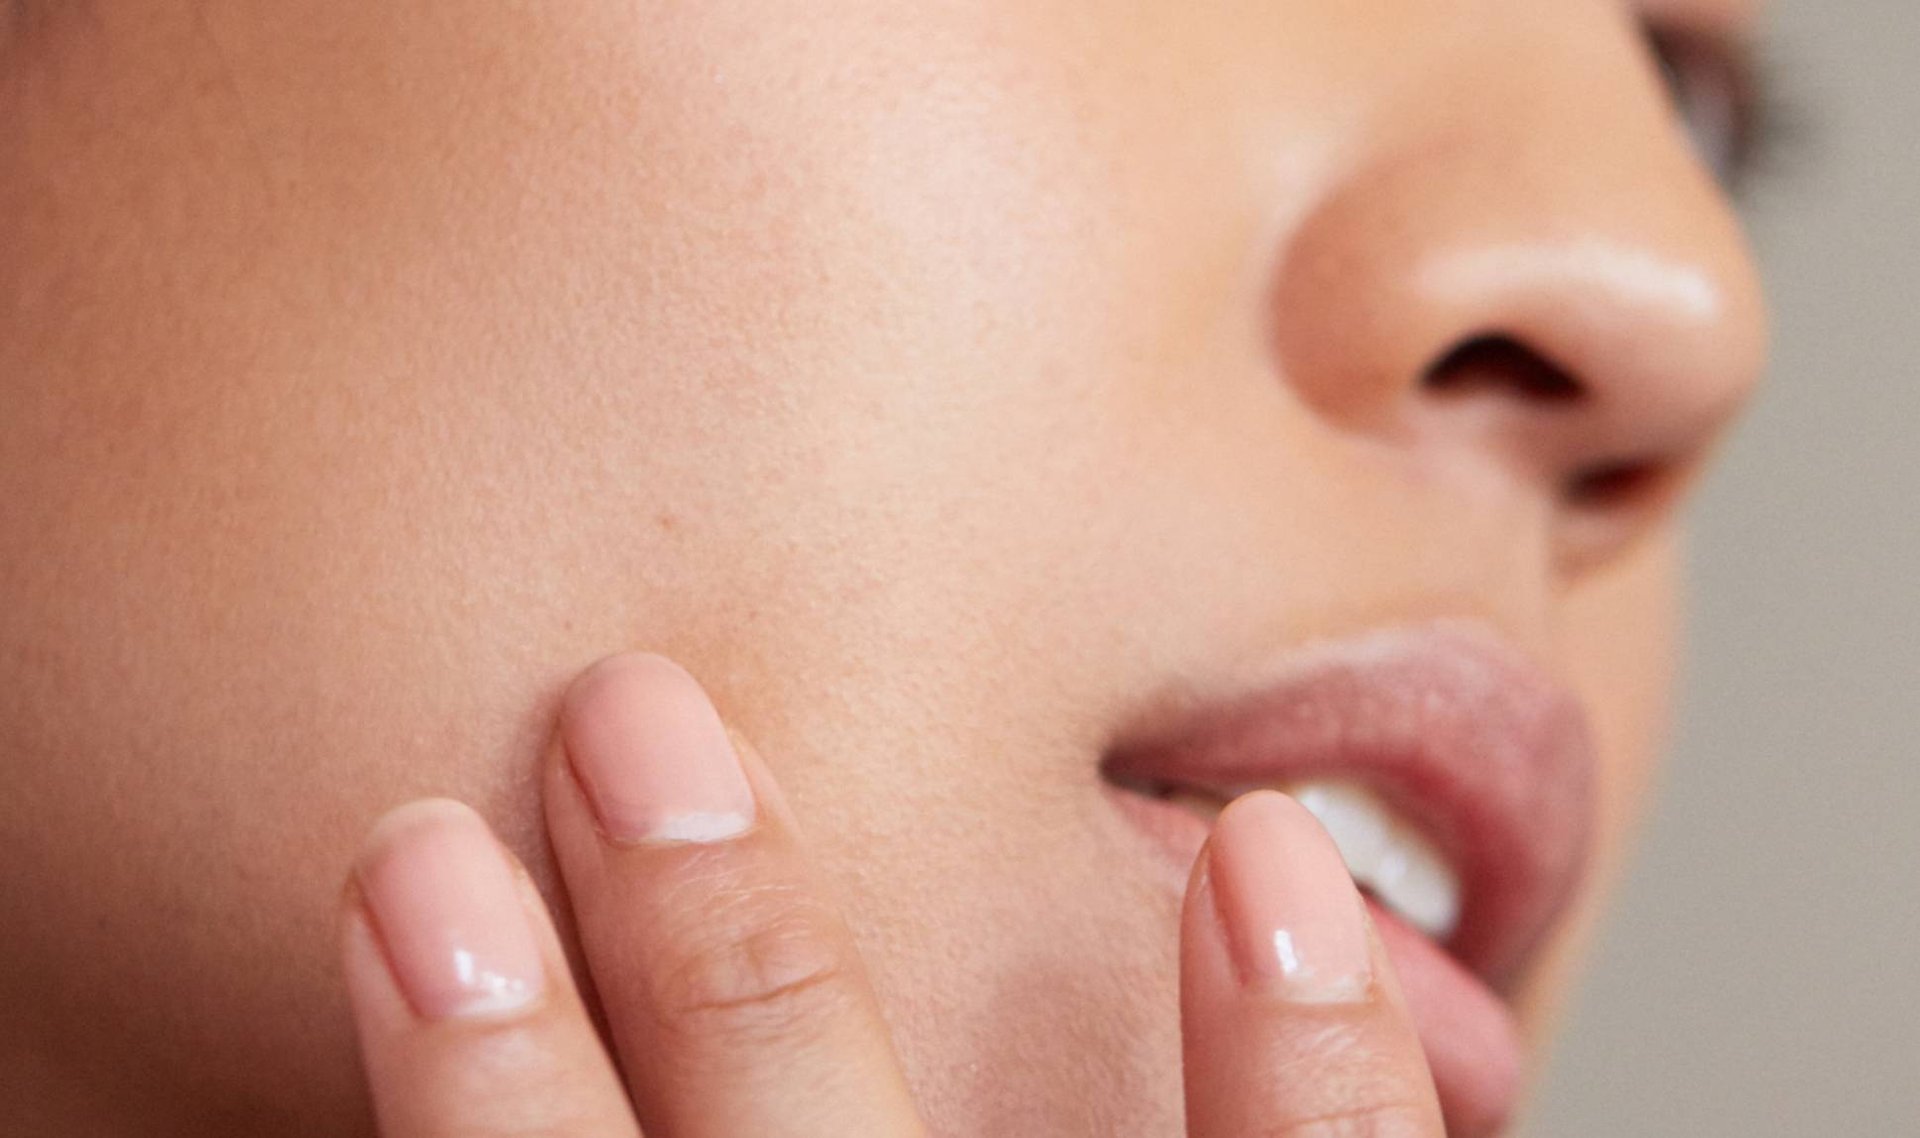 5 Grossly Pimple-Popping Videos